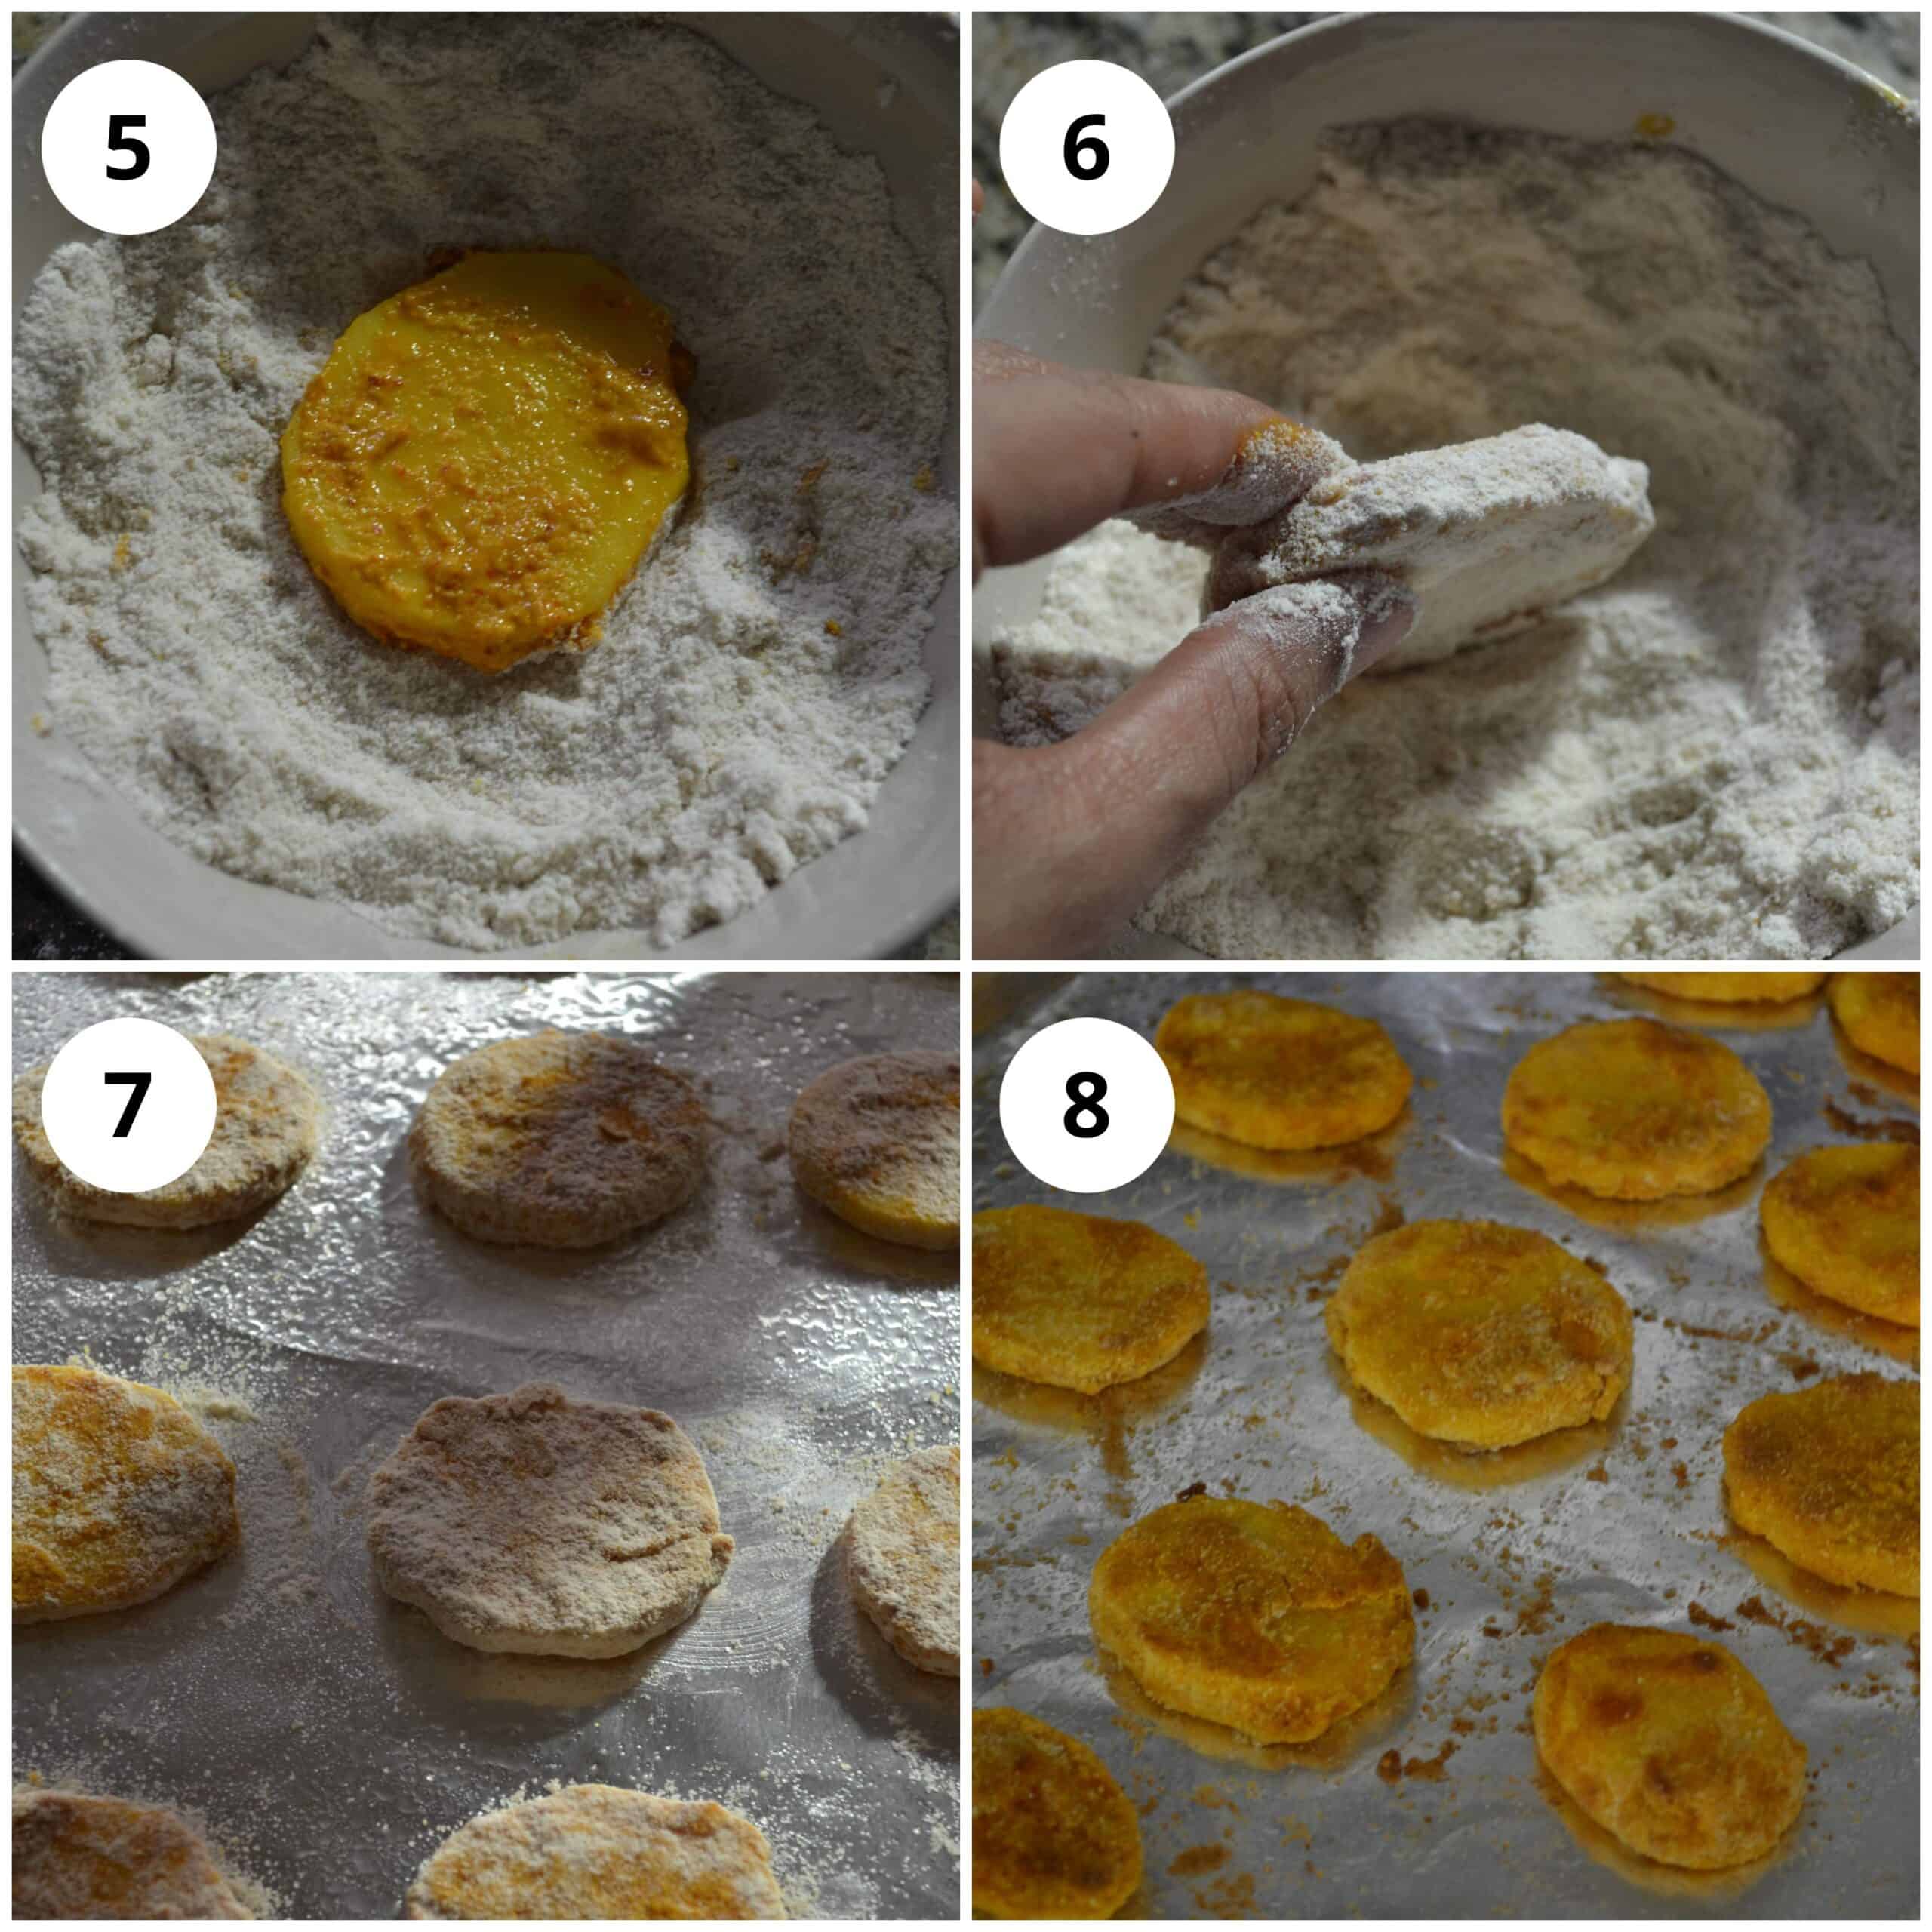 Coating the potato chips in the flour and baking them